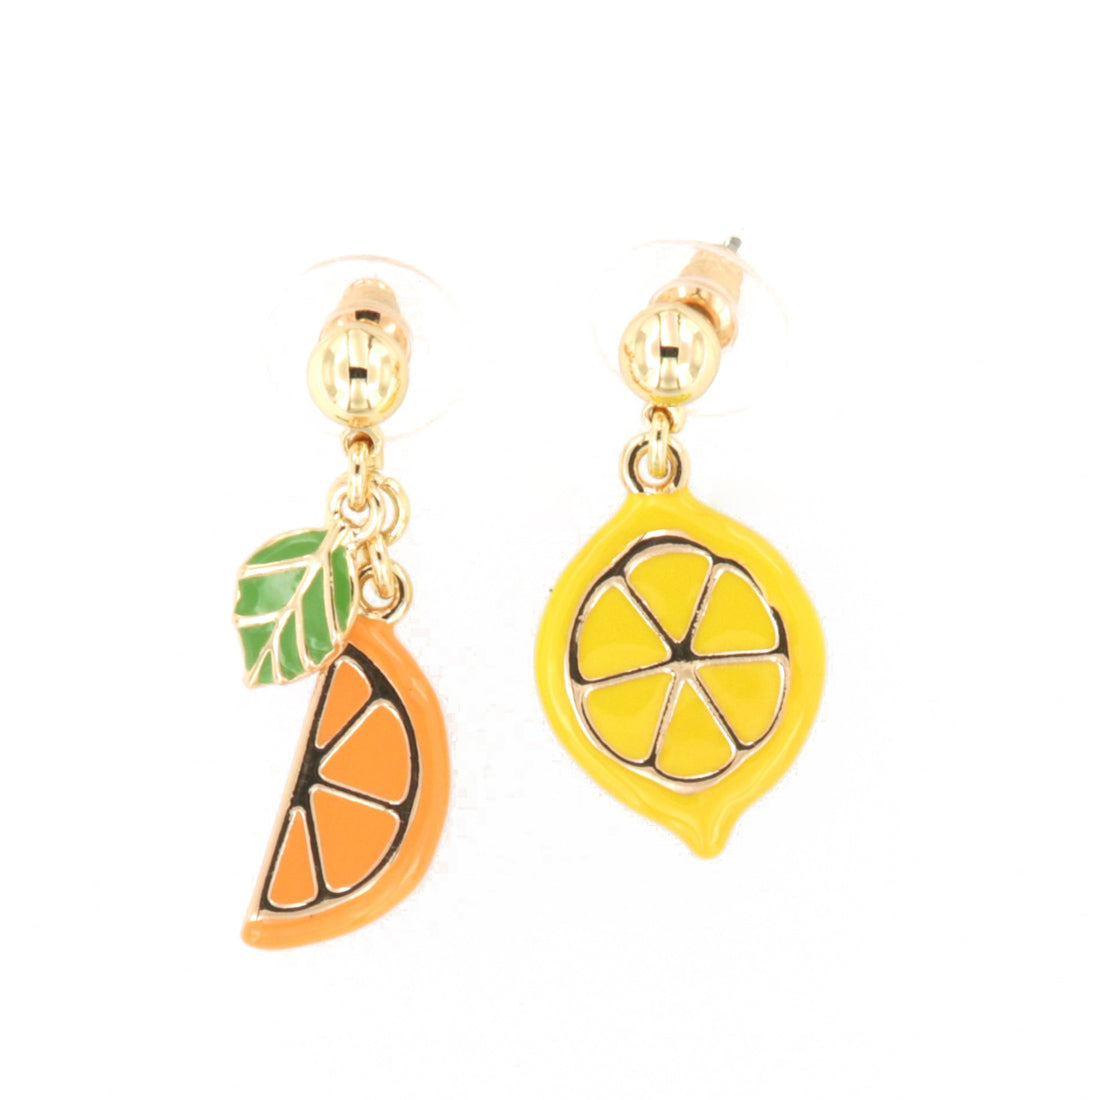 Metal earrings with citrus citrus fruits, embellished with colored enamels